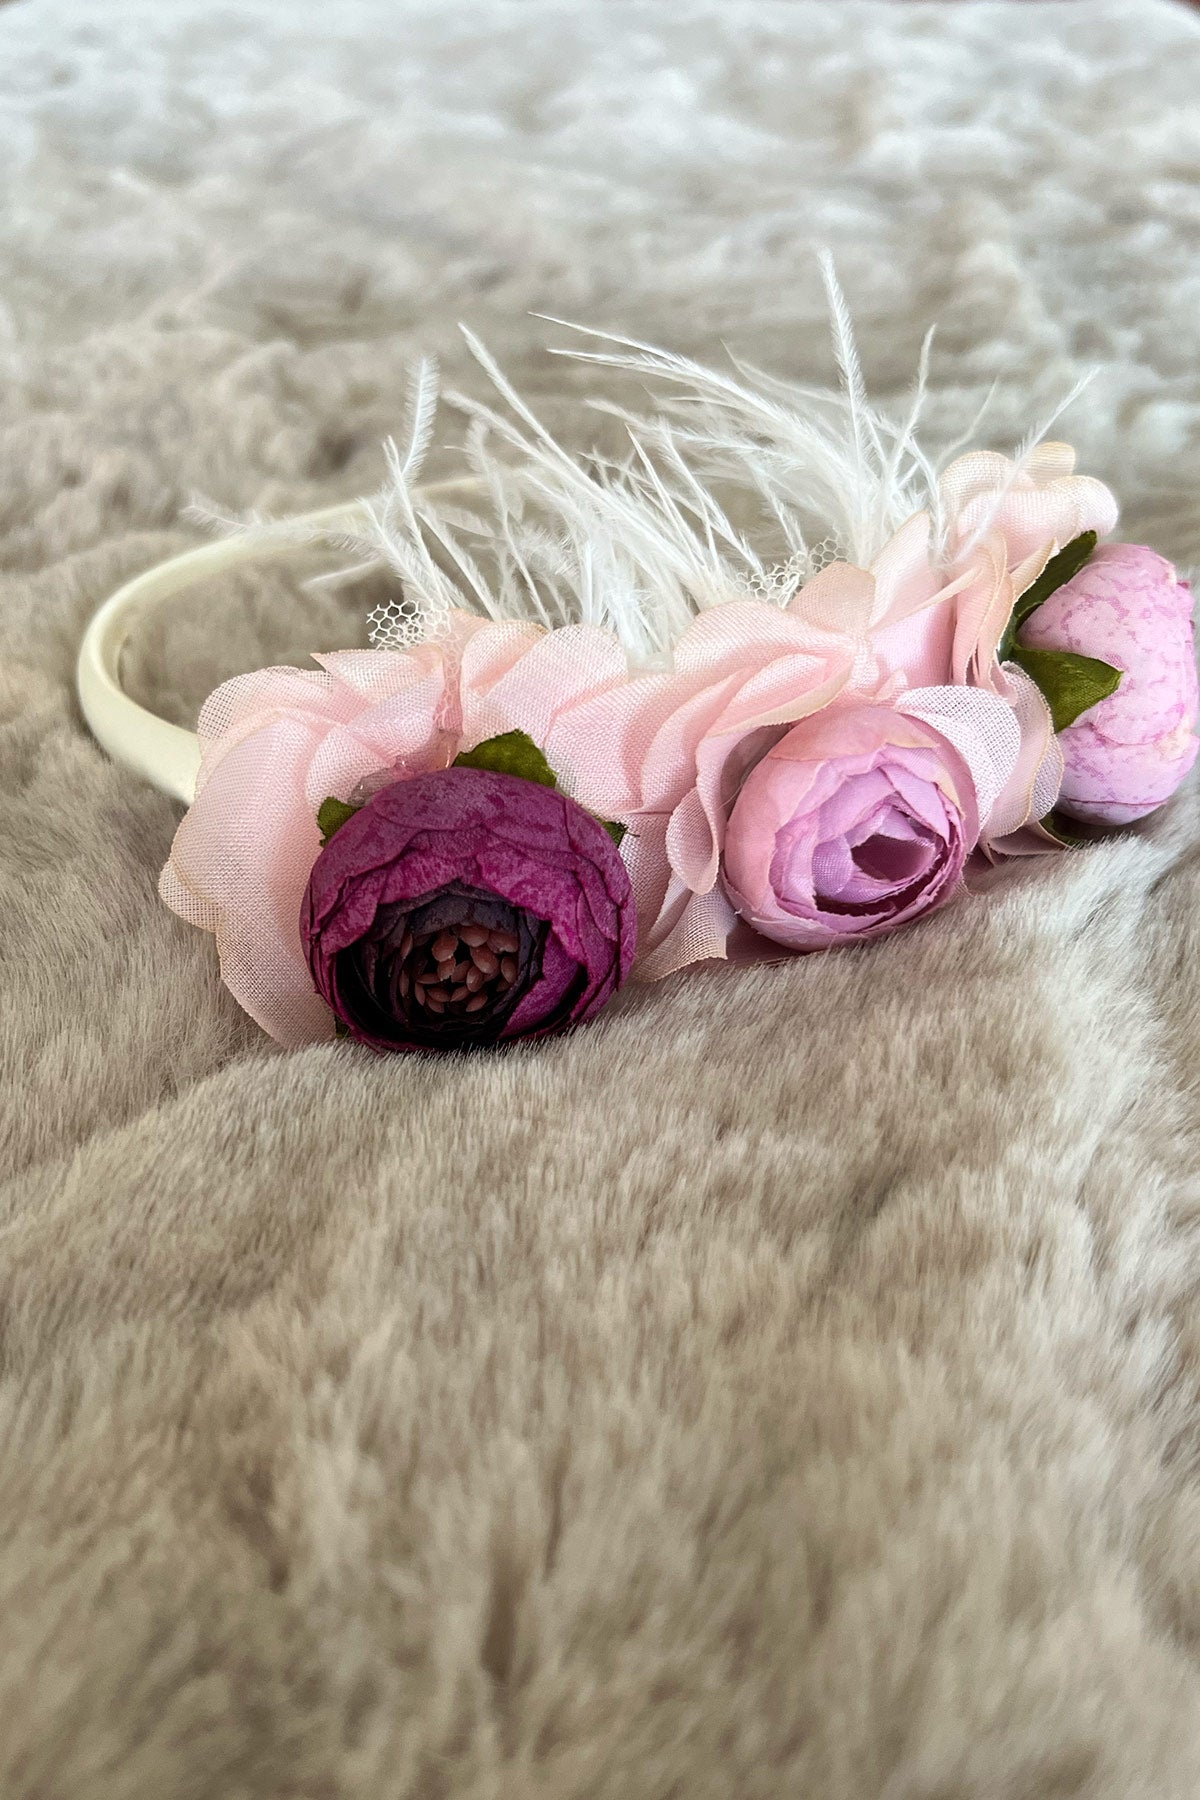 Rose Themed Postpartum And Bridal Crown Dried Rose - 9109